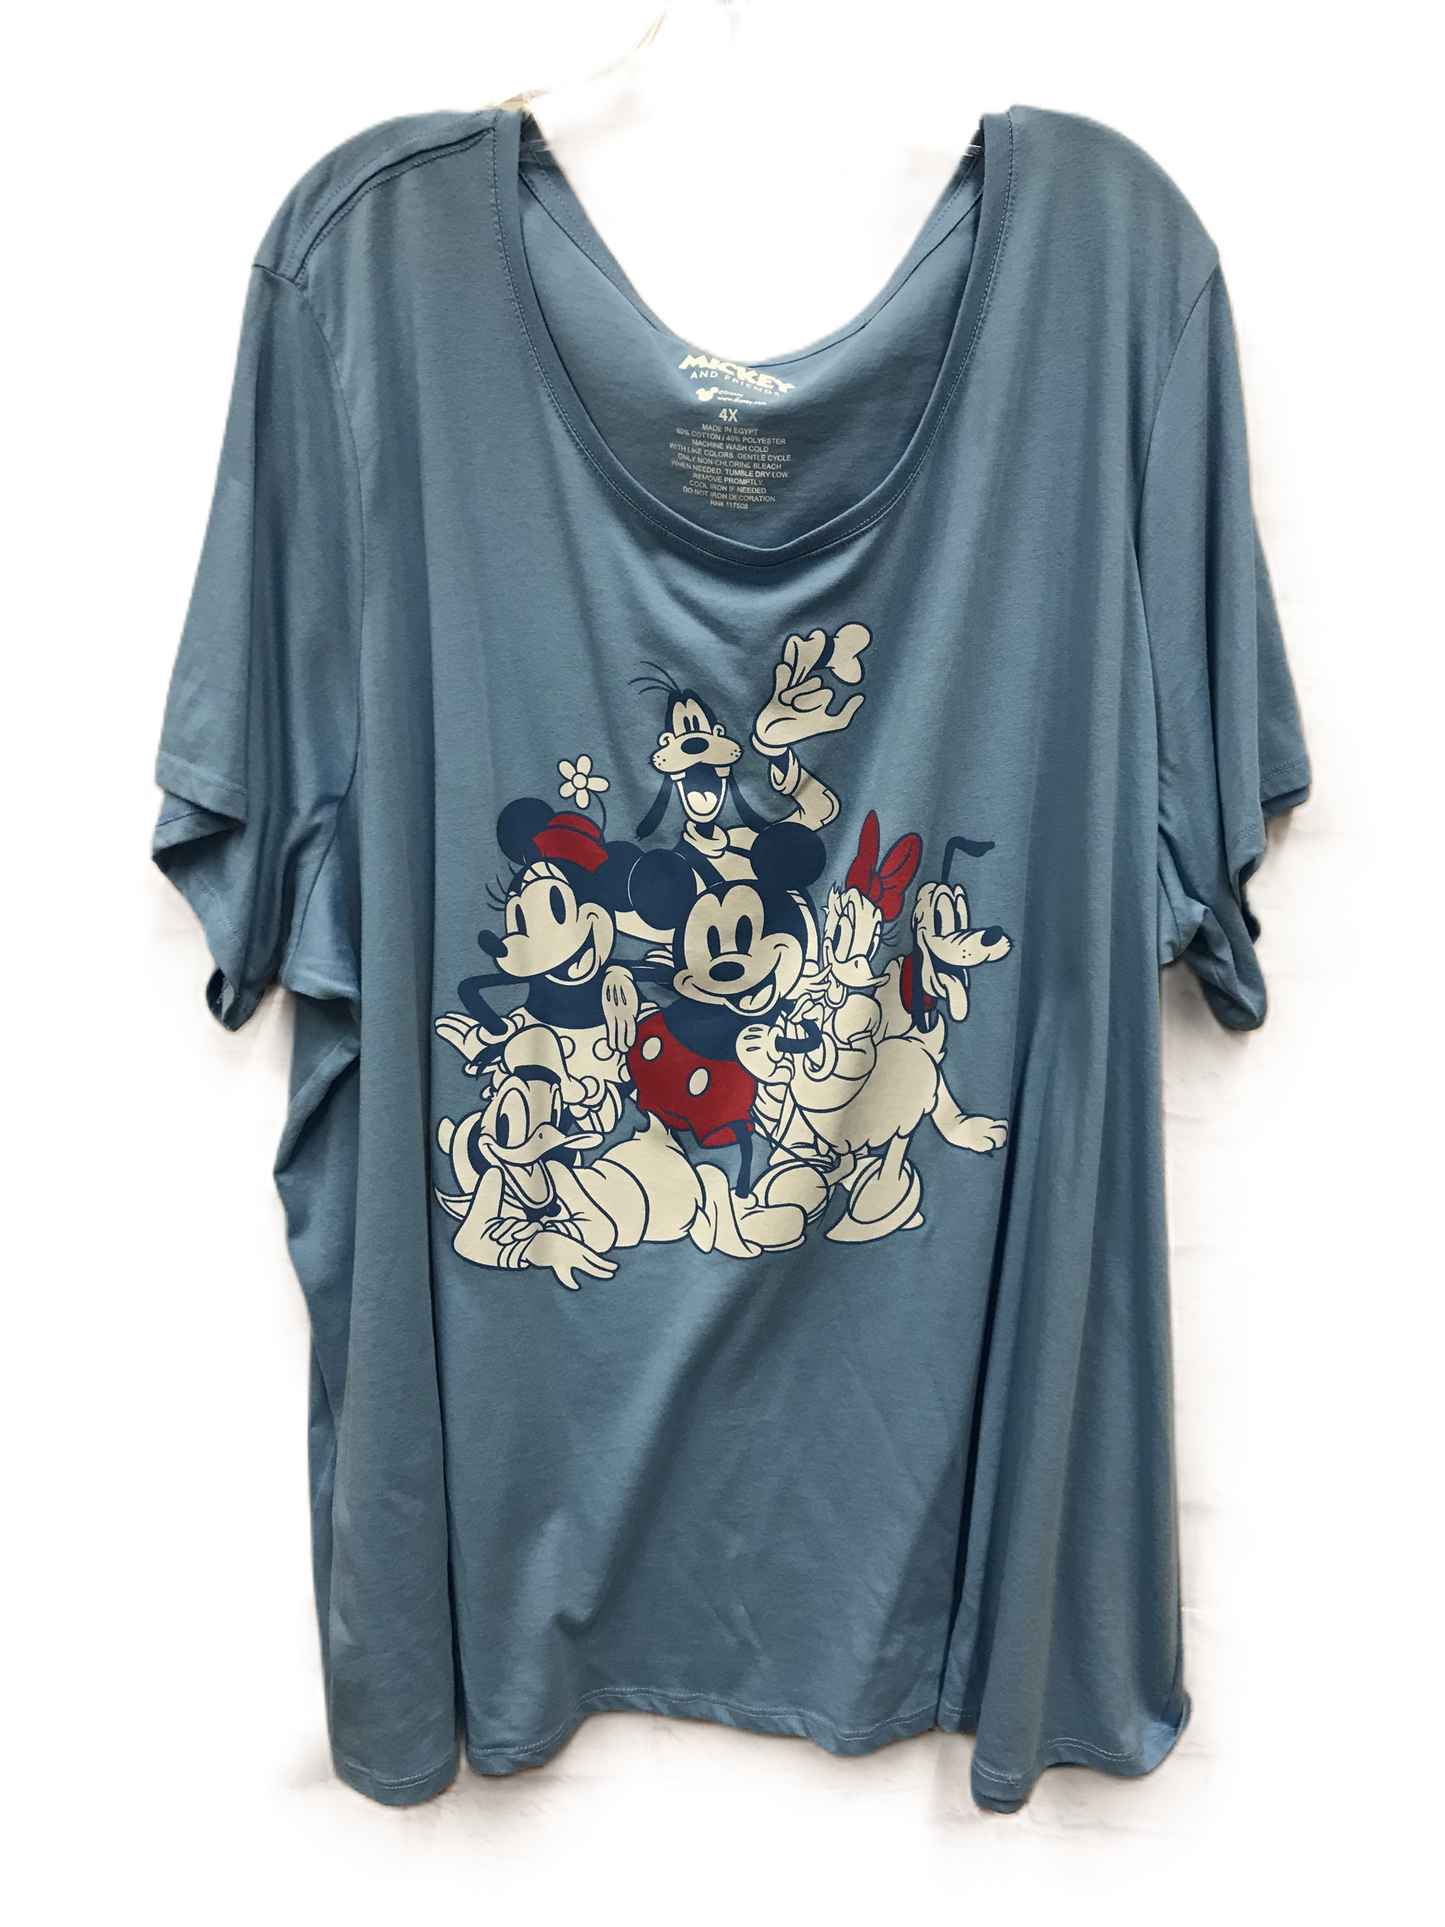 Blue Top Short Sleeve By Disney Store, Size: 4x